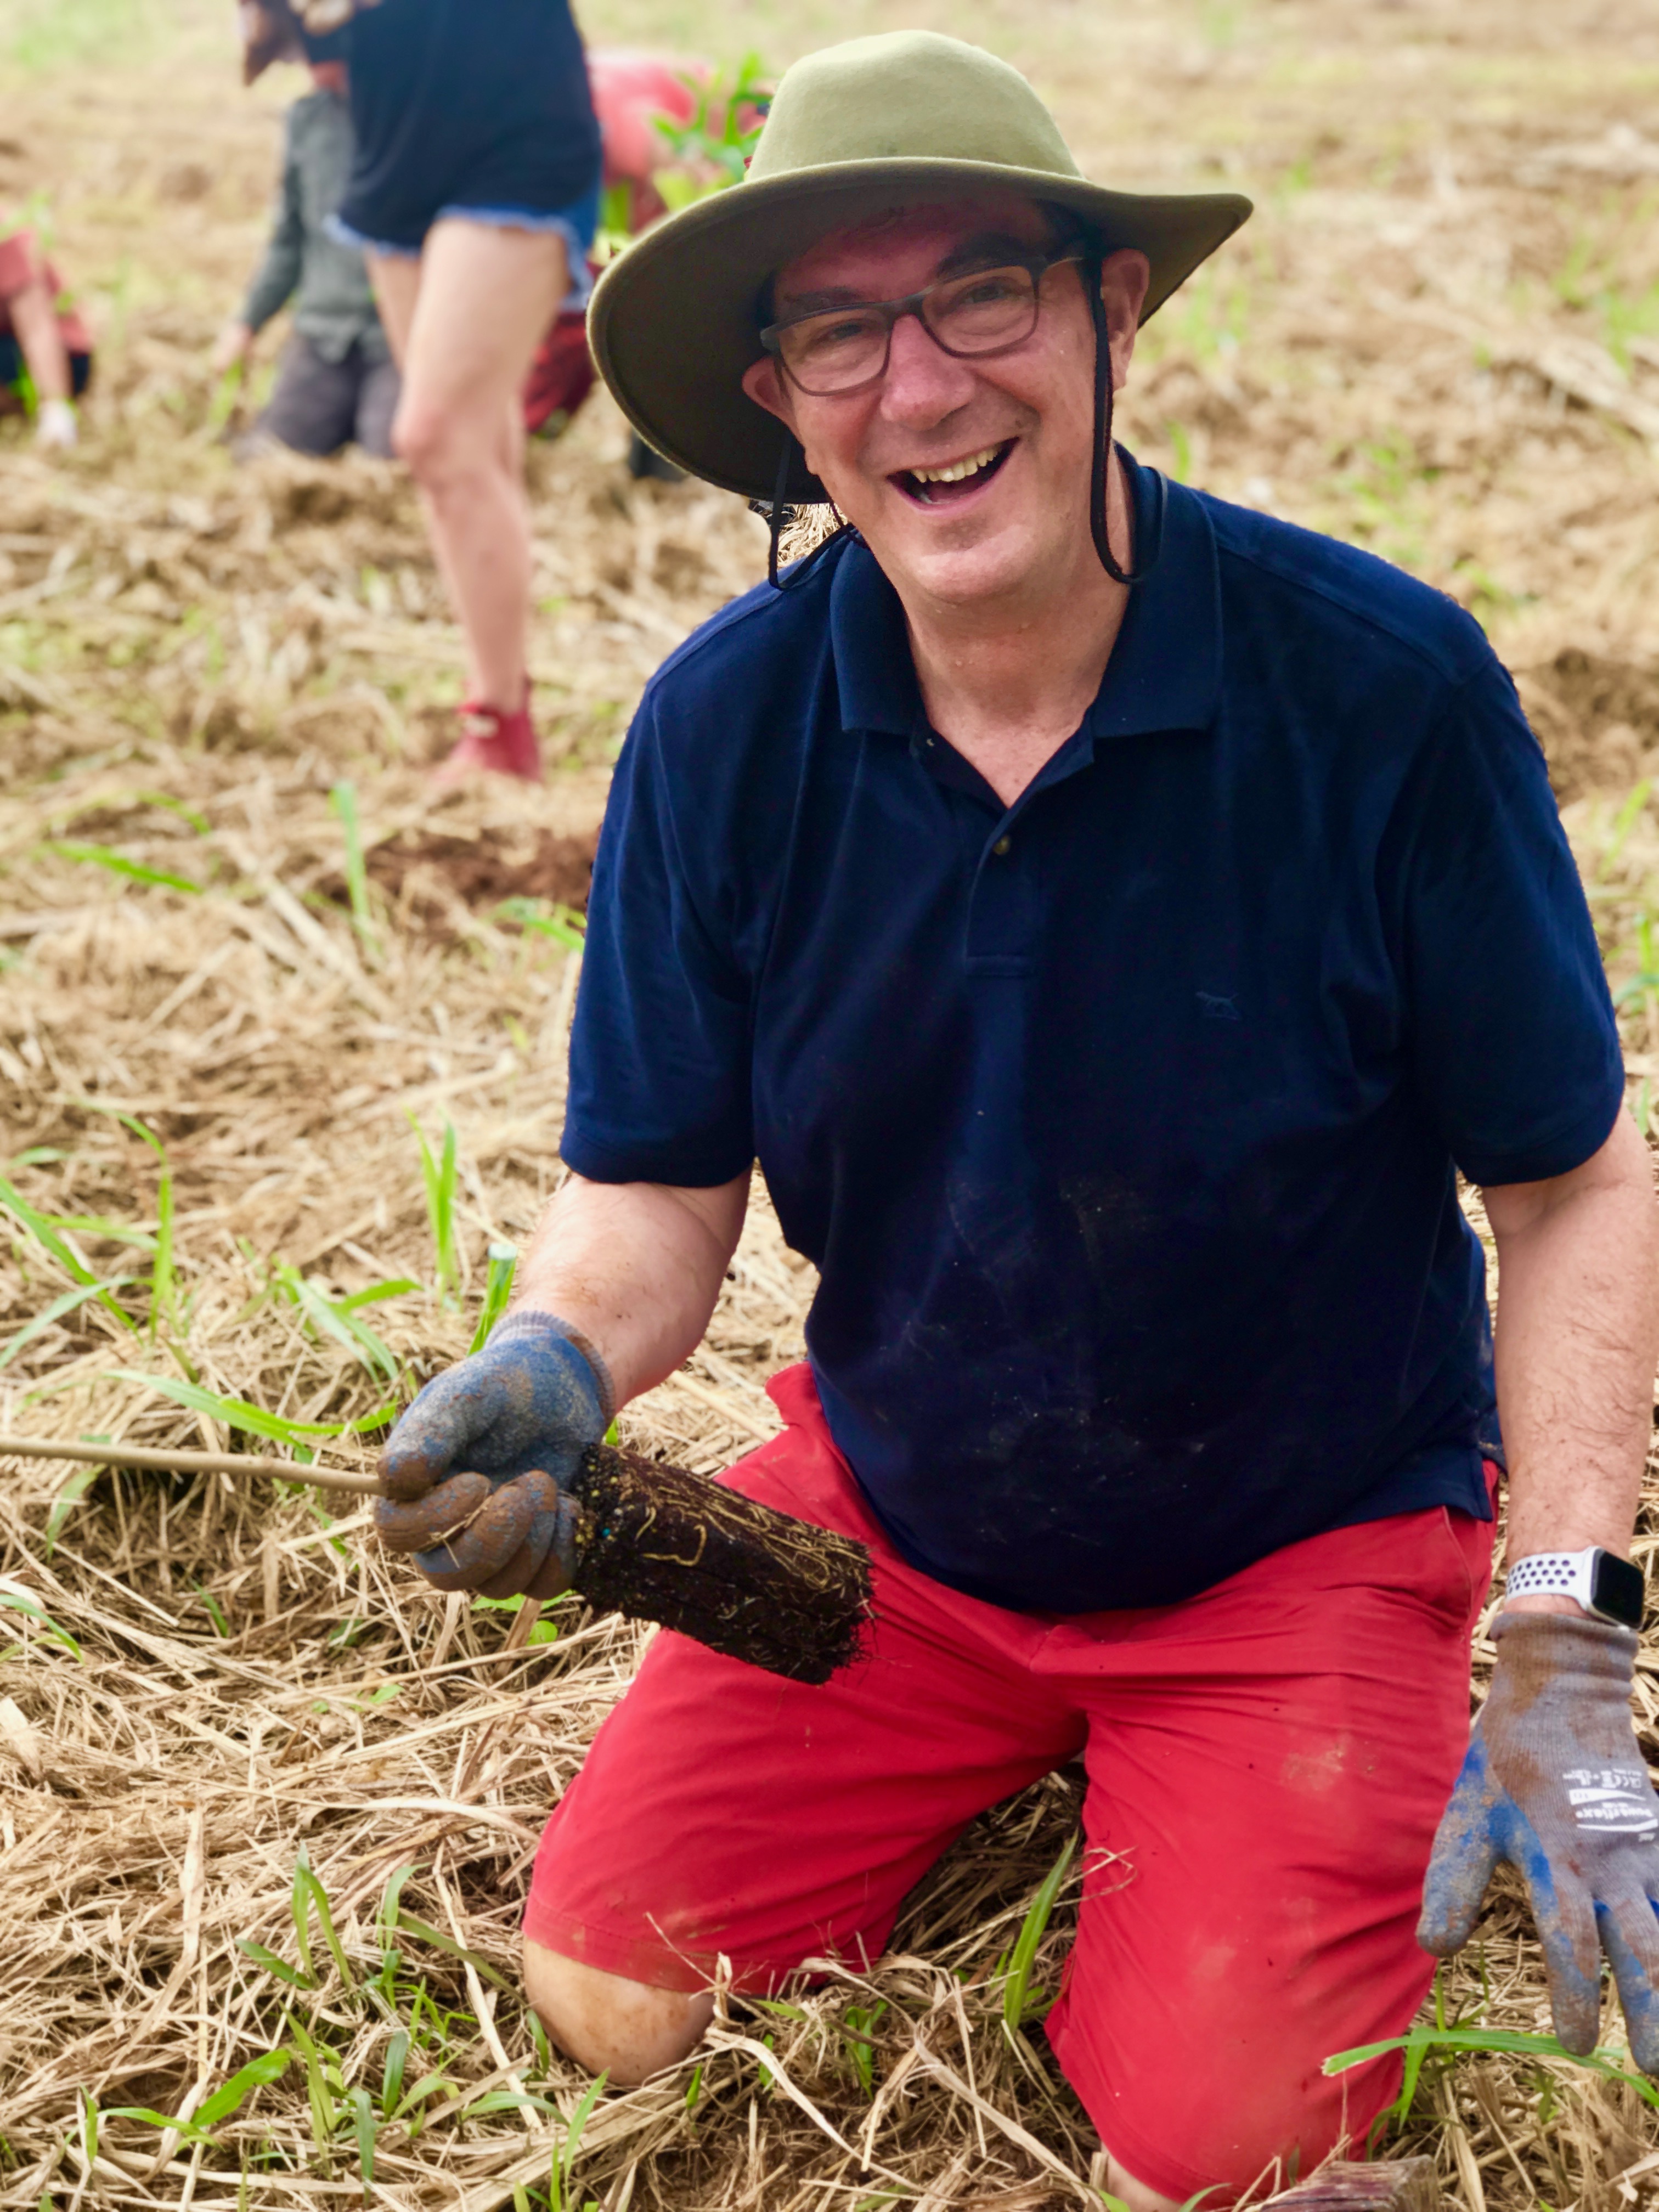 Board member, Tony Gilding, getting his hands dirty for Nature. 3000 trees.